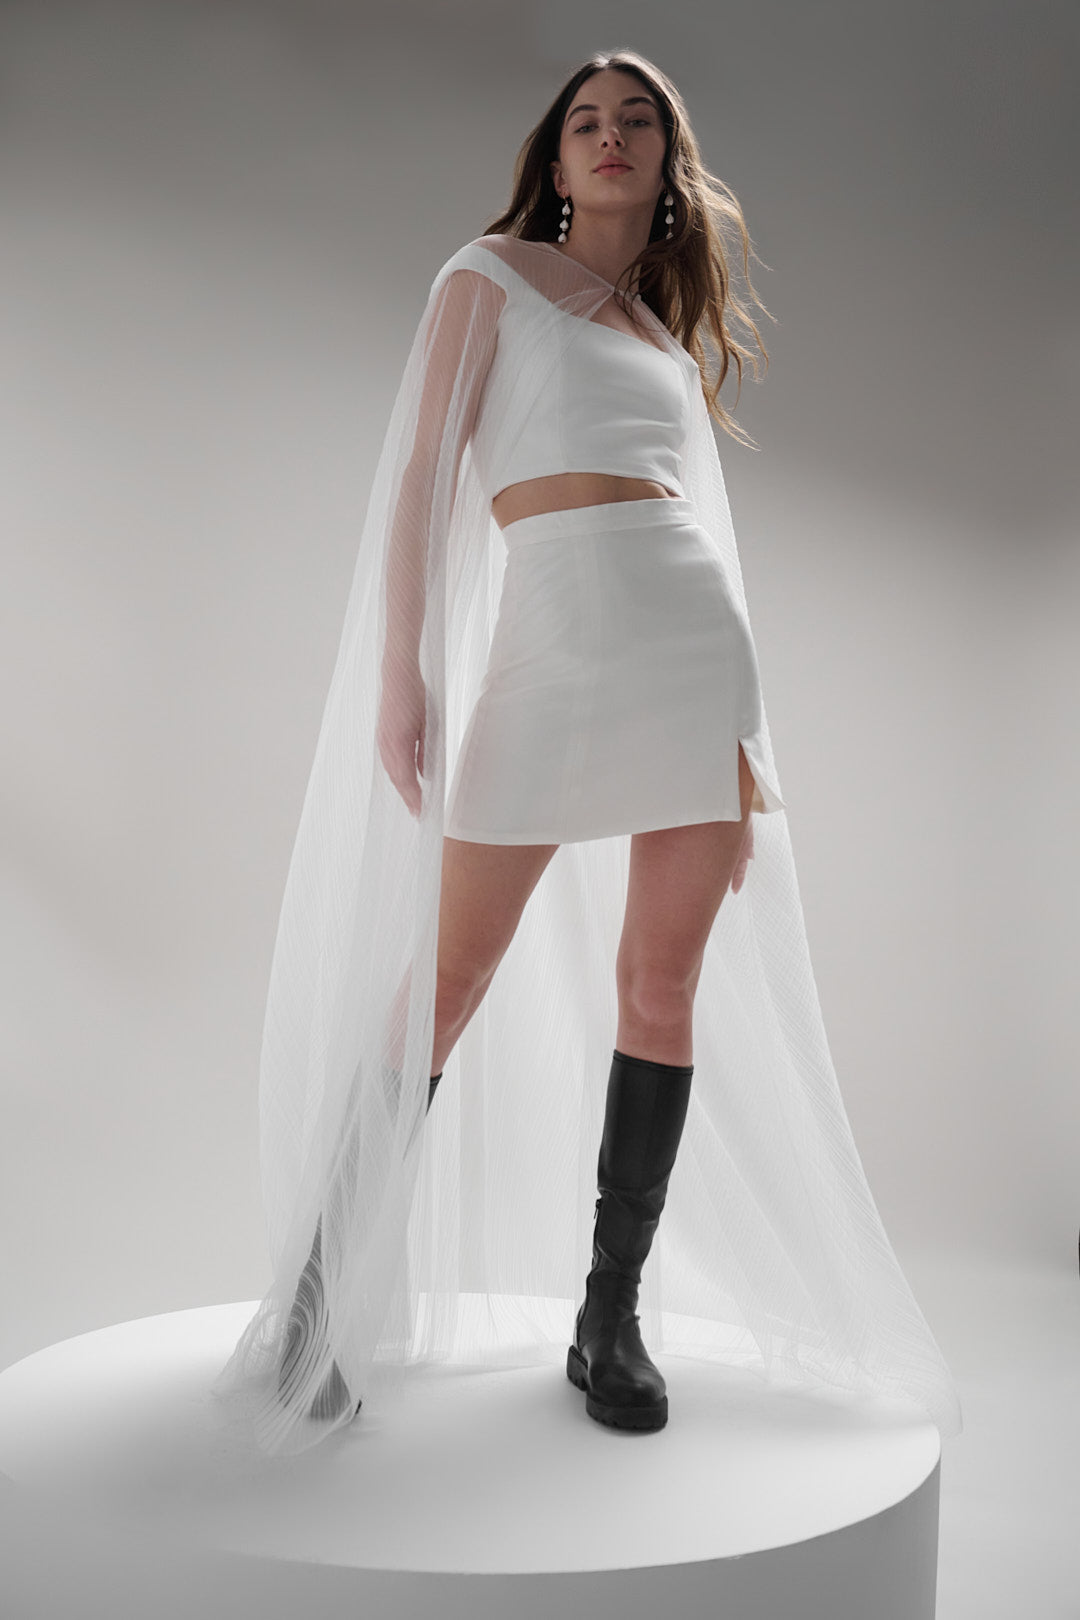 The perfect mini skirt for the bold and modern bride who loves to make a statement. This rebellious piece is designed to turn heads and is a must-have for those who aren't afraid to break bridal fashion traditions.